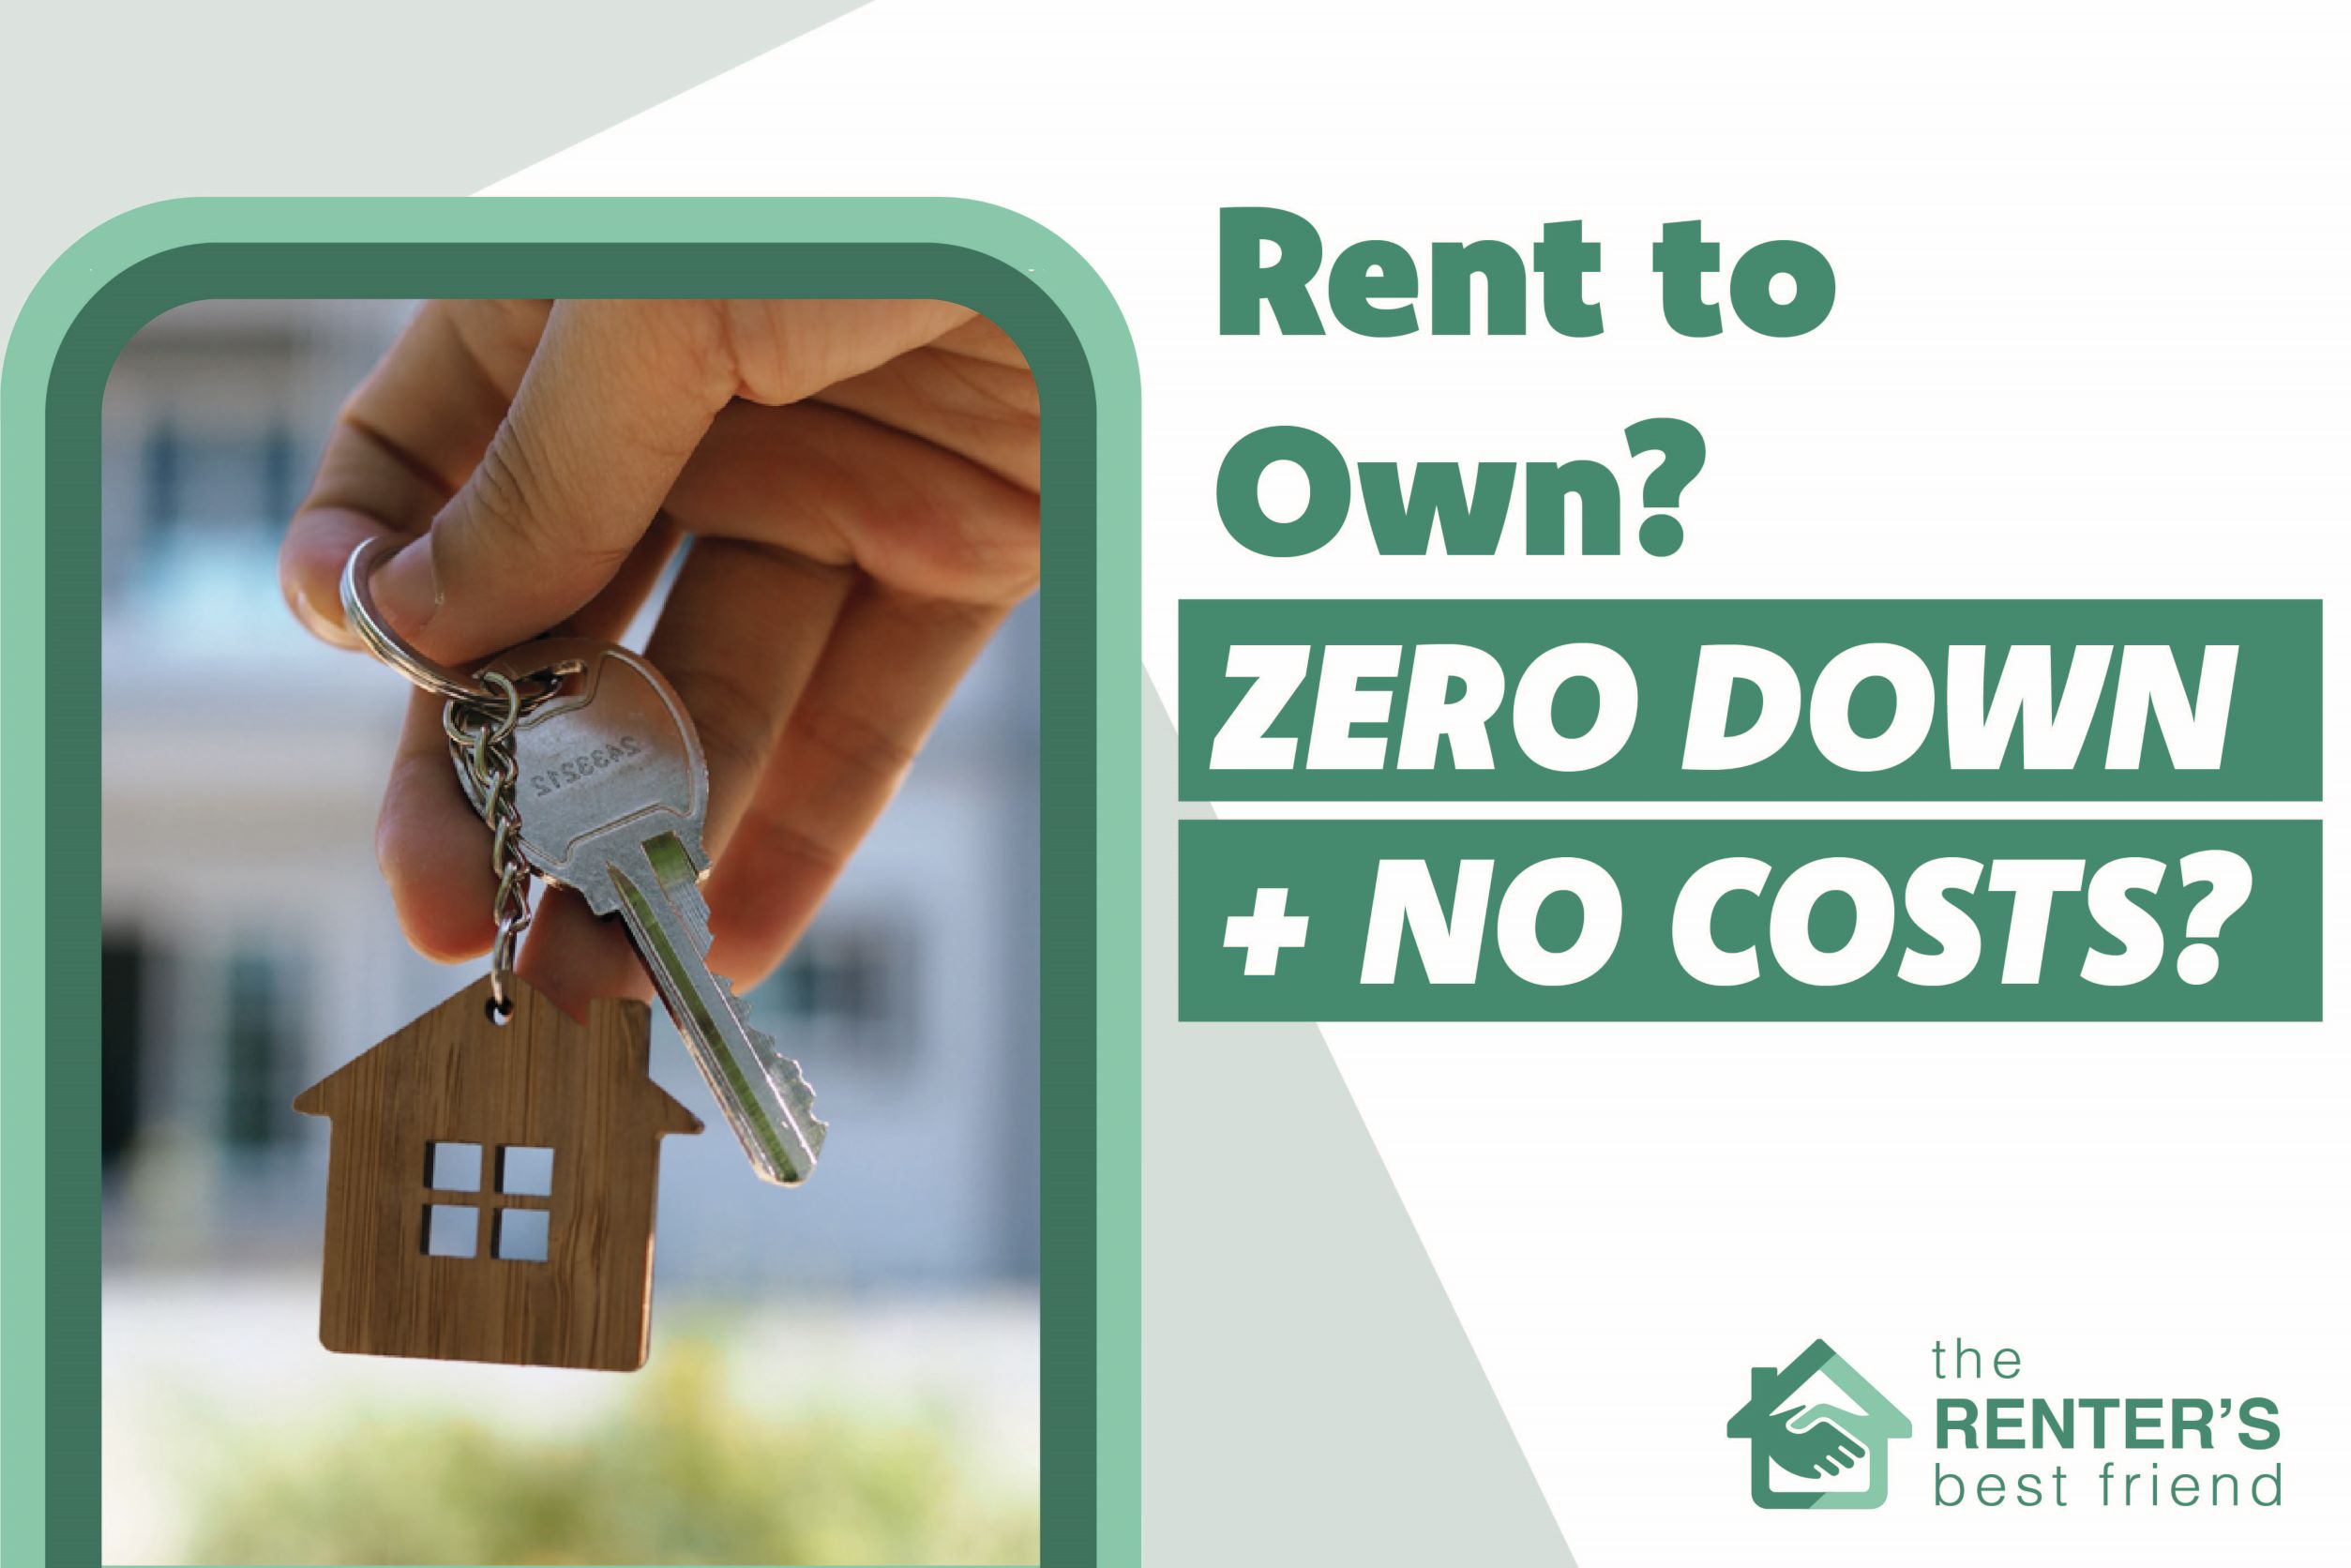 Can I Get a Rent to Own (RTO) Home Home for Zero Down and No Upfront Costs?